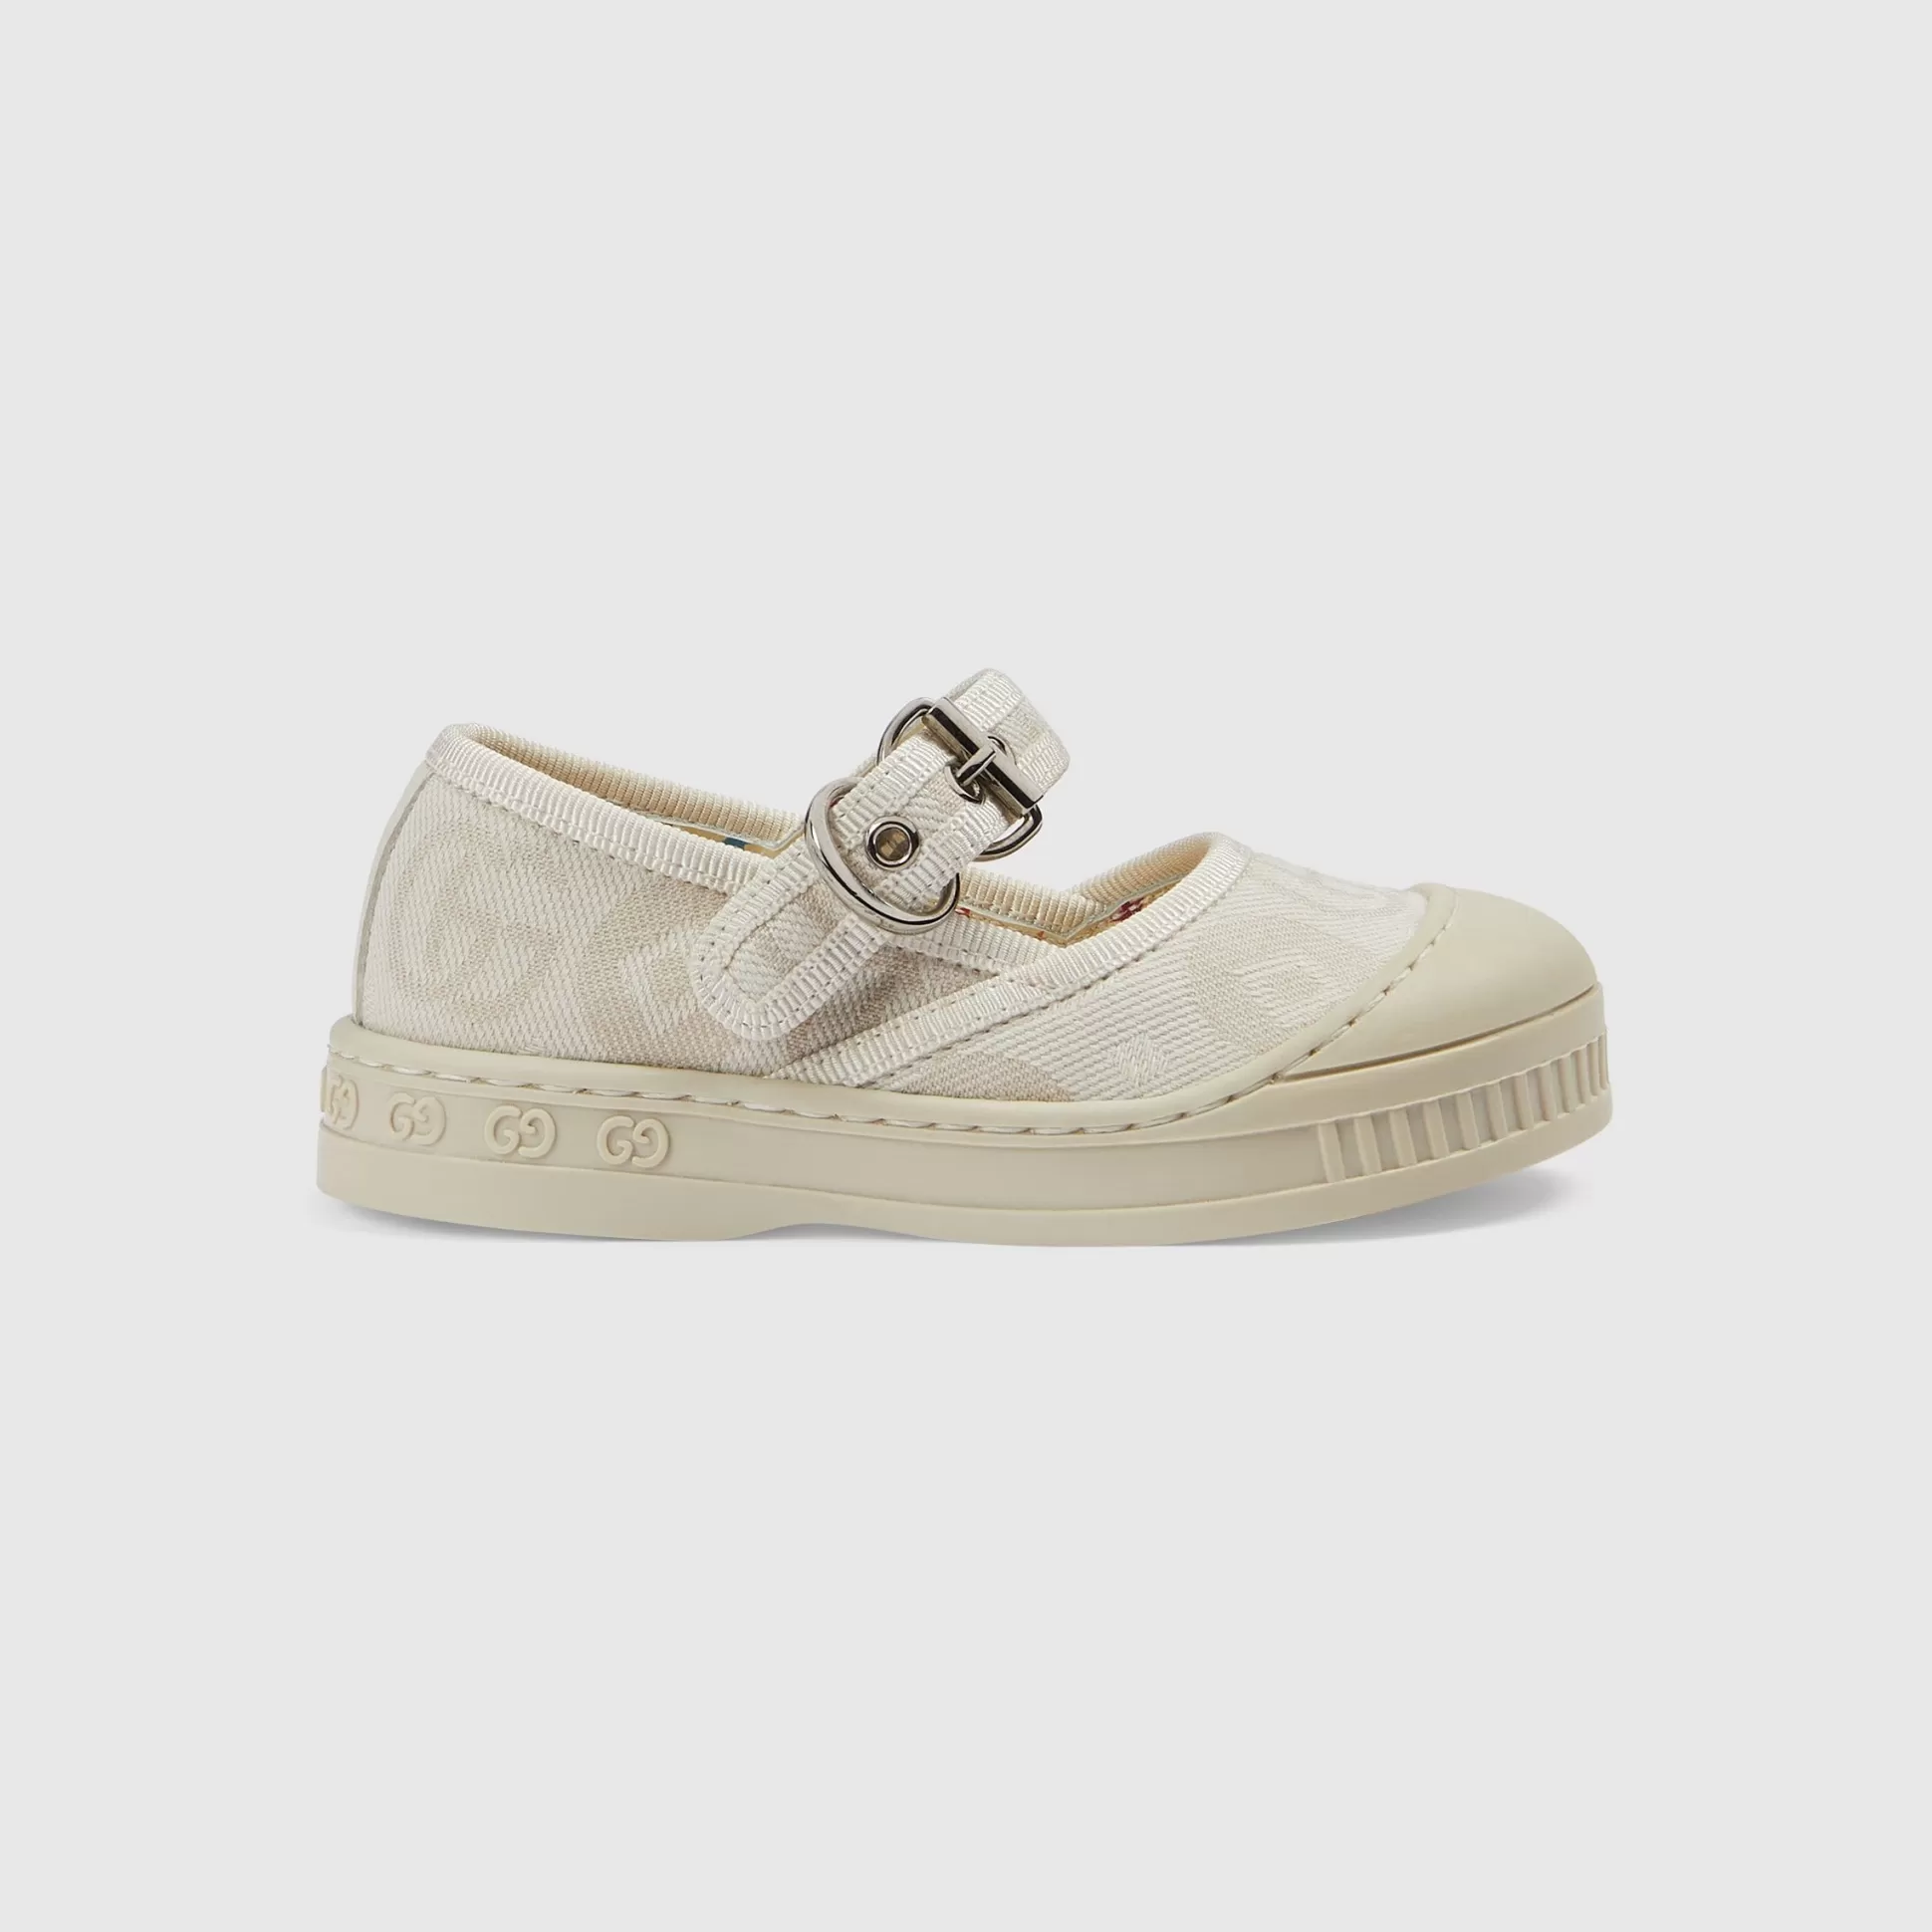 GUCCI Baby Double G Ballet Flat-Children Toddler Shoes (20-26)